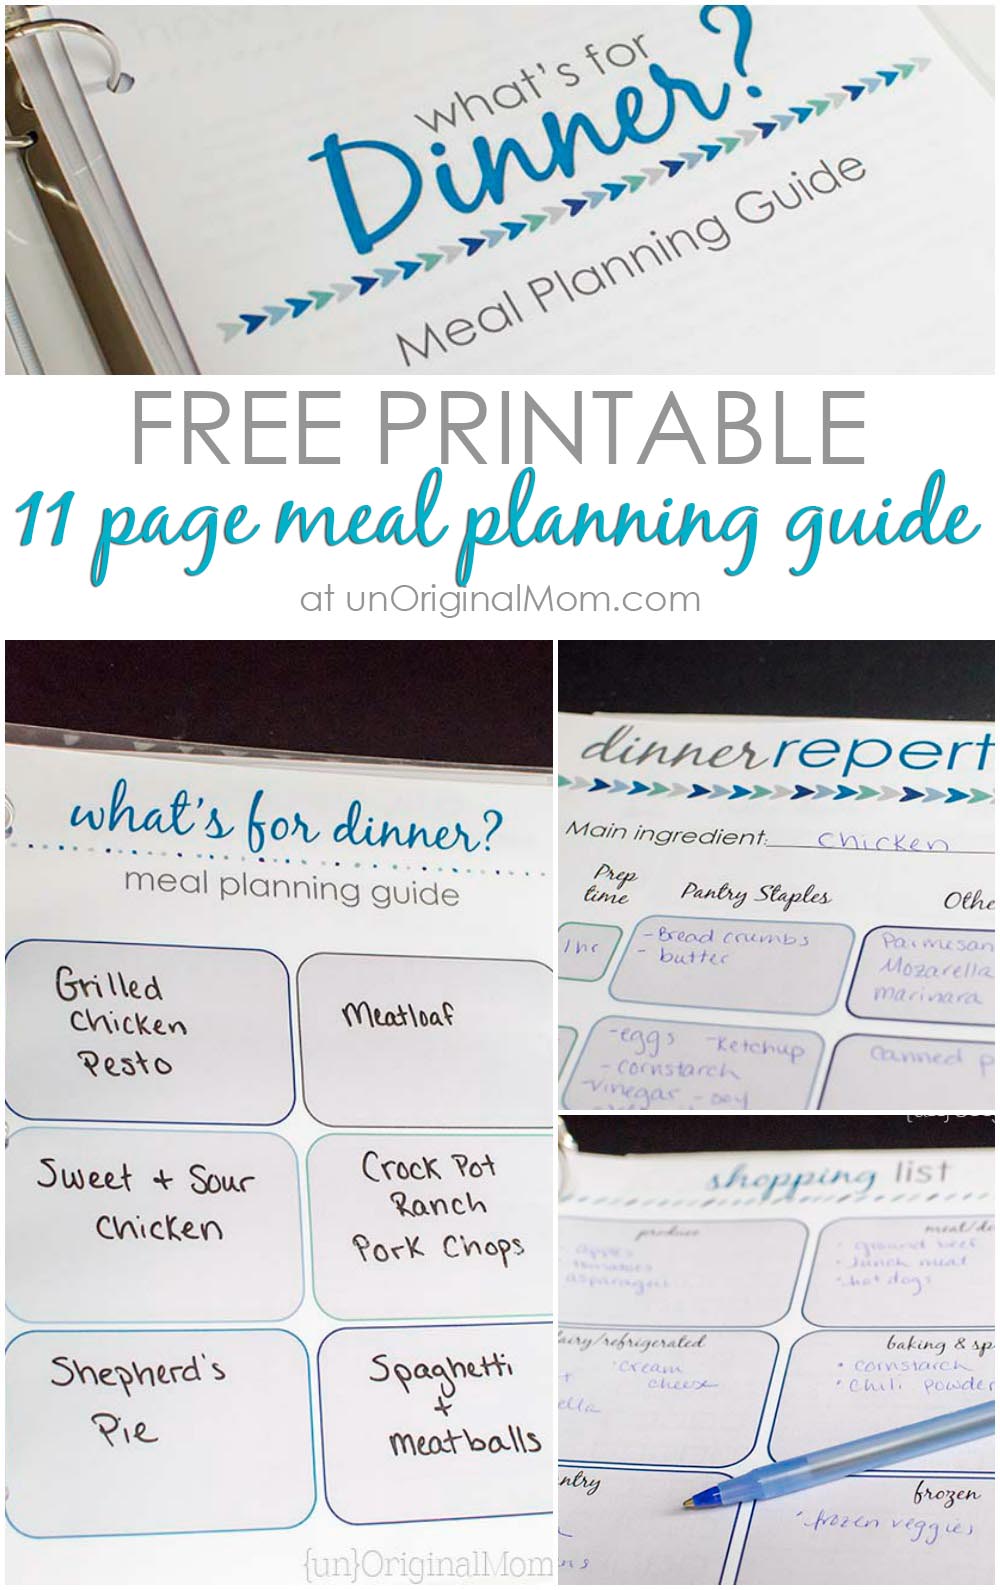 11 page flexible meal planning guide - includes dinner repertoire pages, a shopping list, pantry inventory chart, and more! What a great way to stay on top of meal planning.